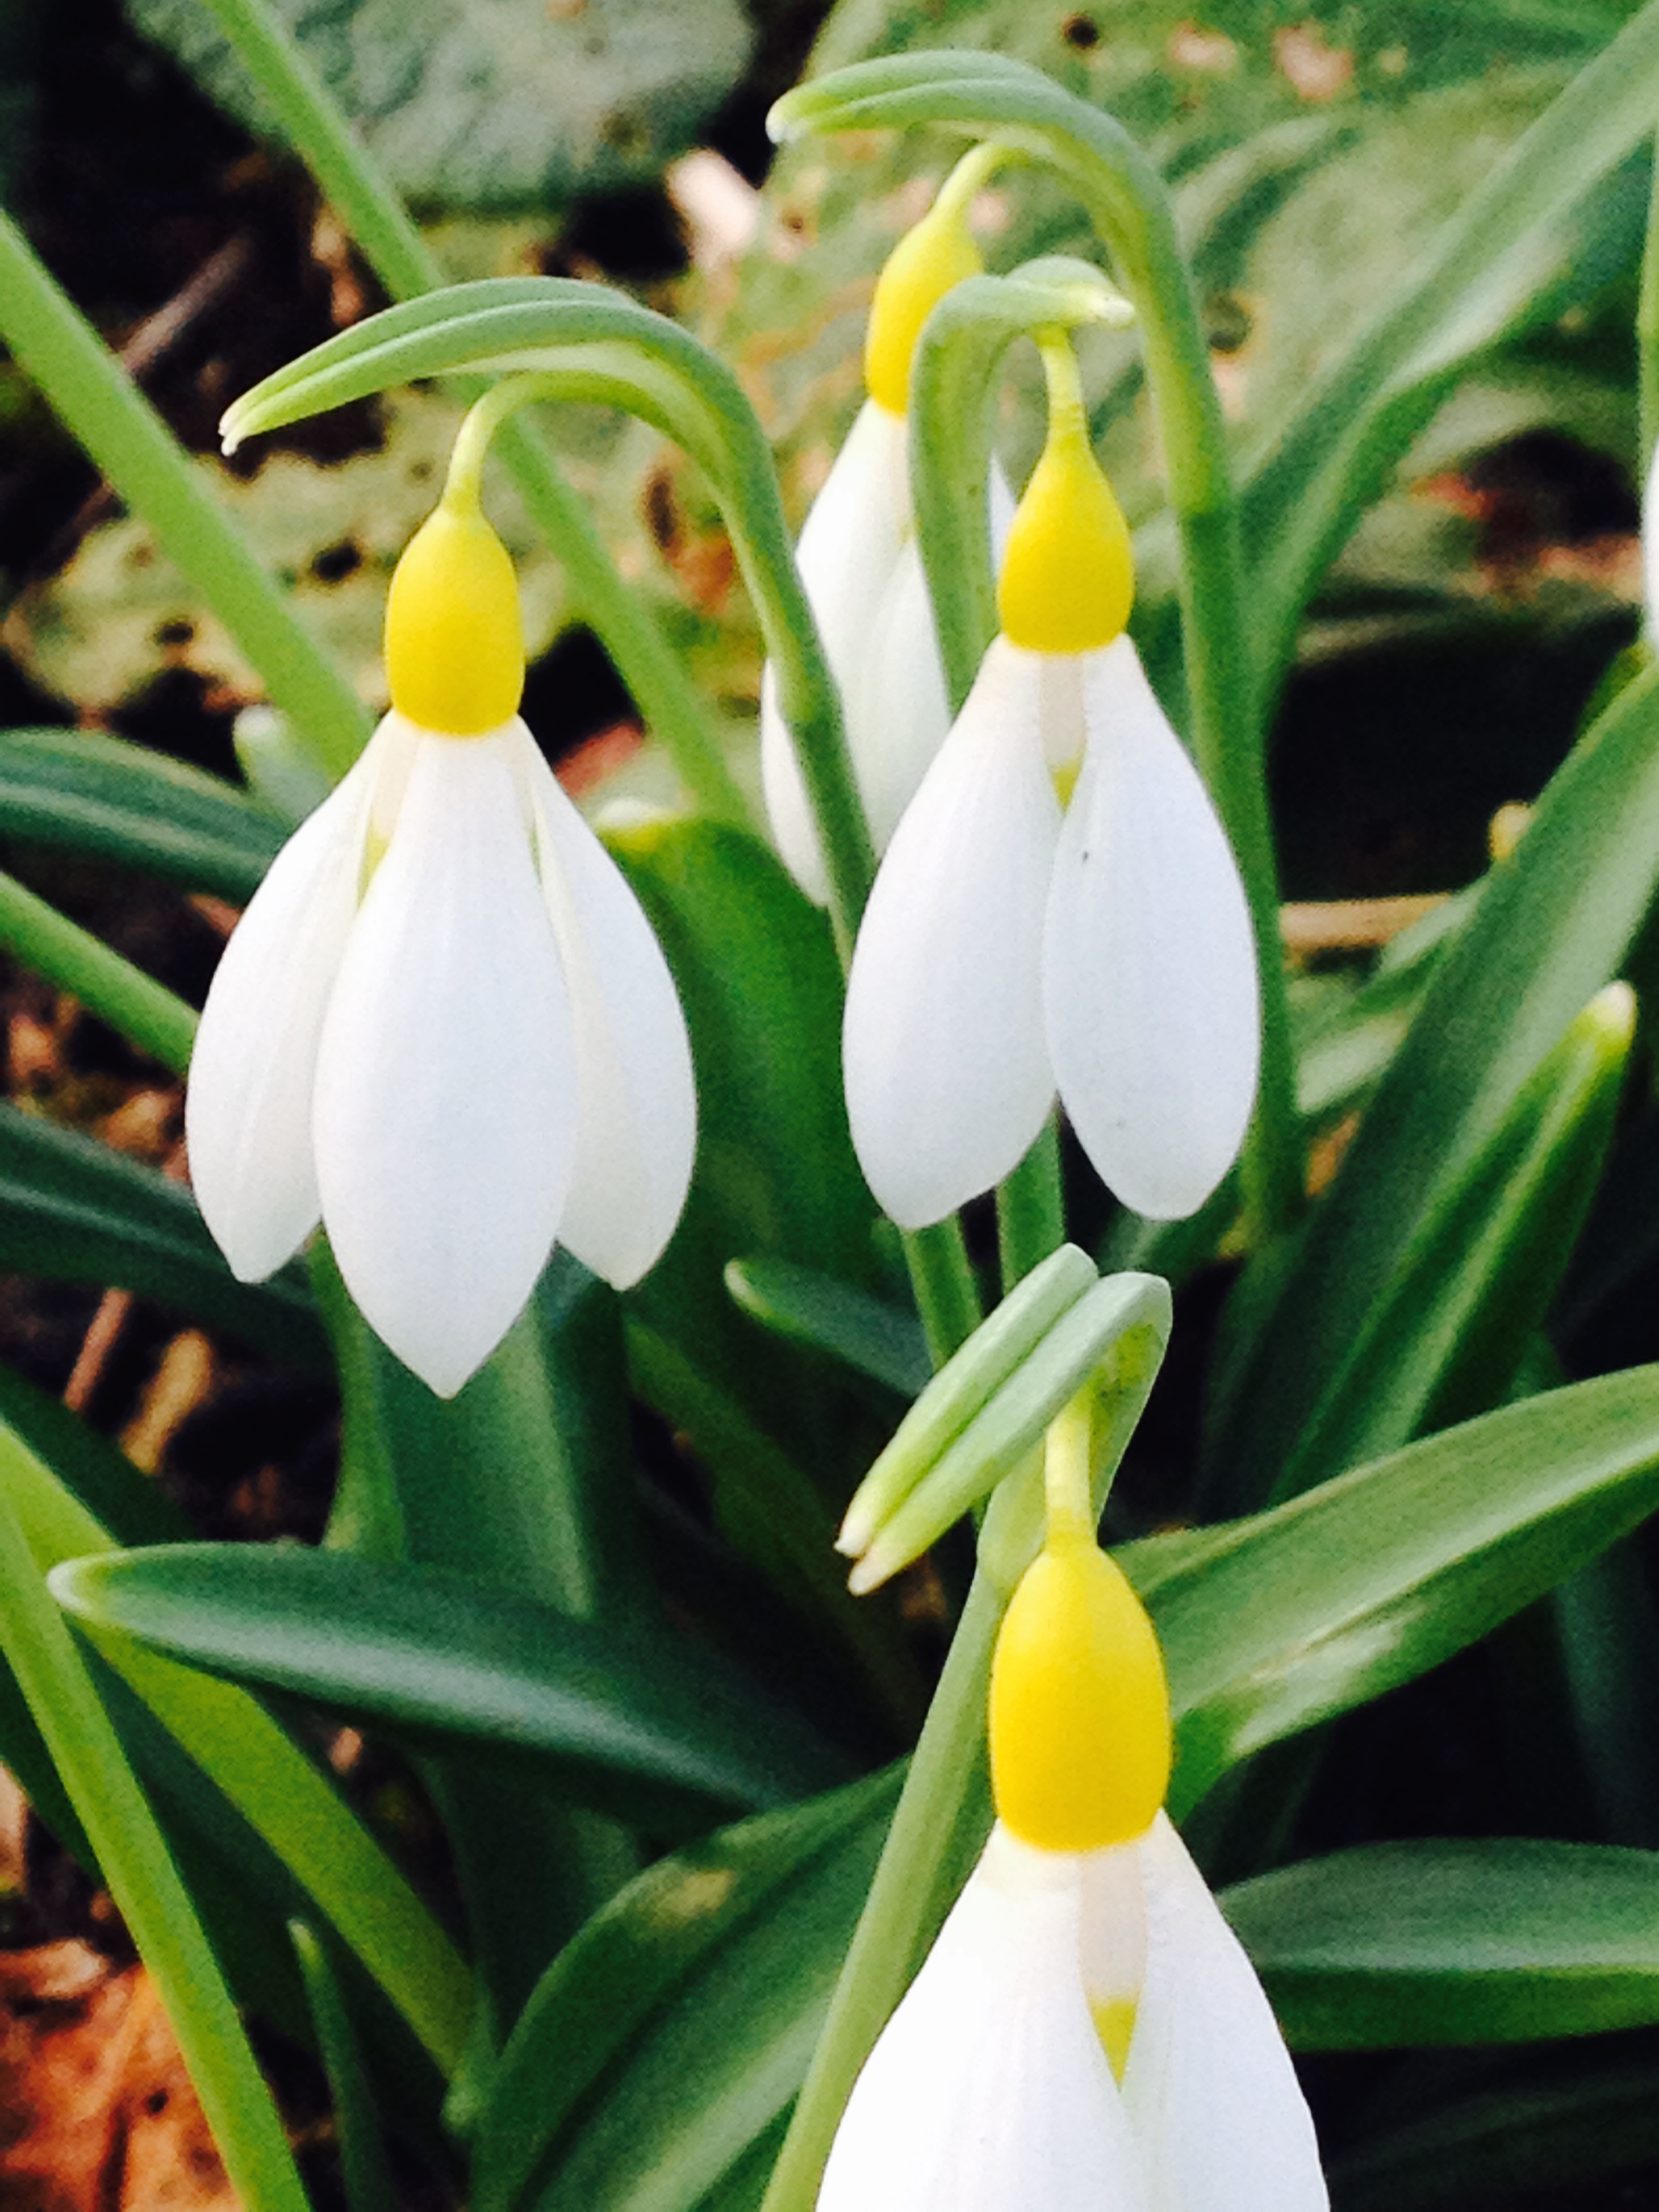 Snowdrop weekend 2019 16-17th February 11-4